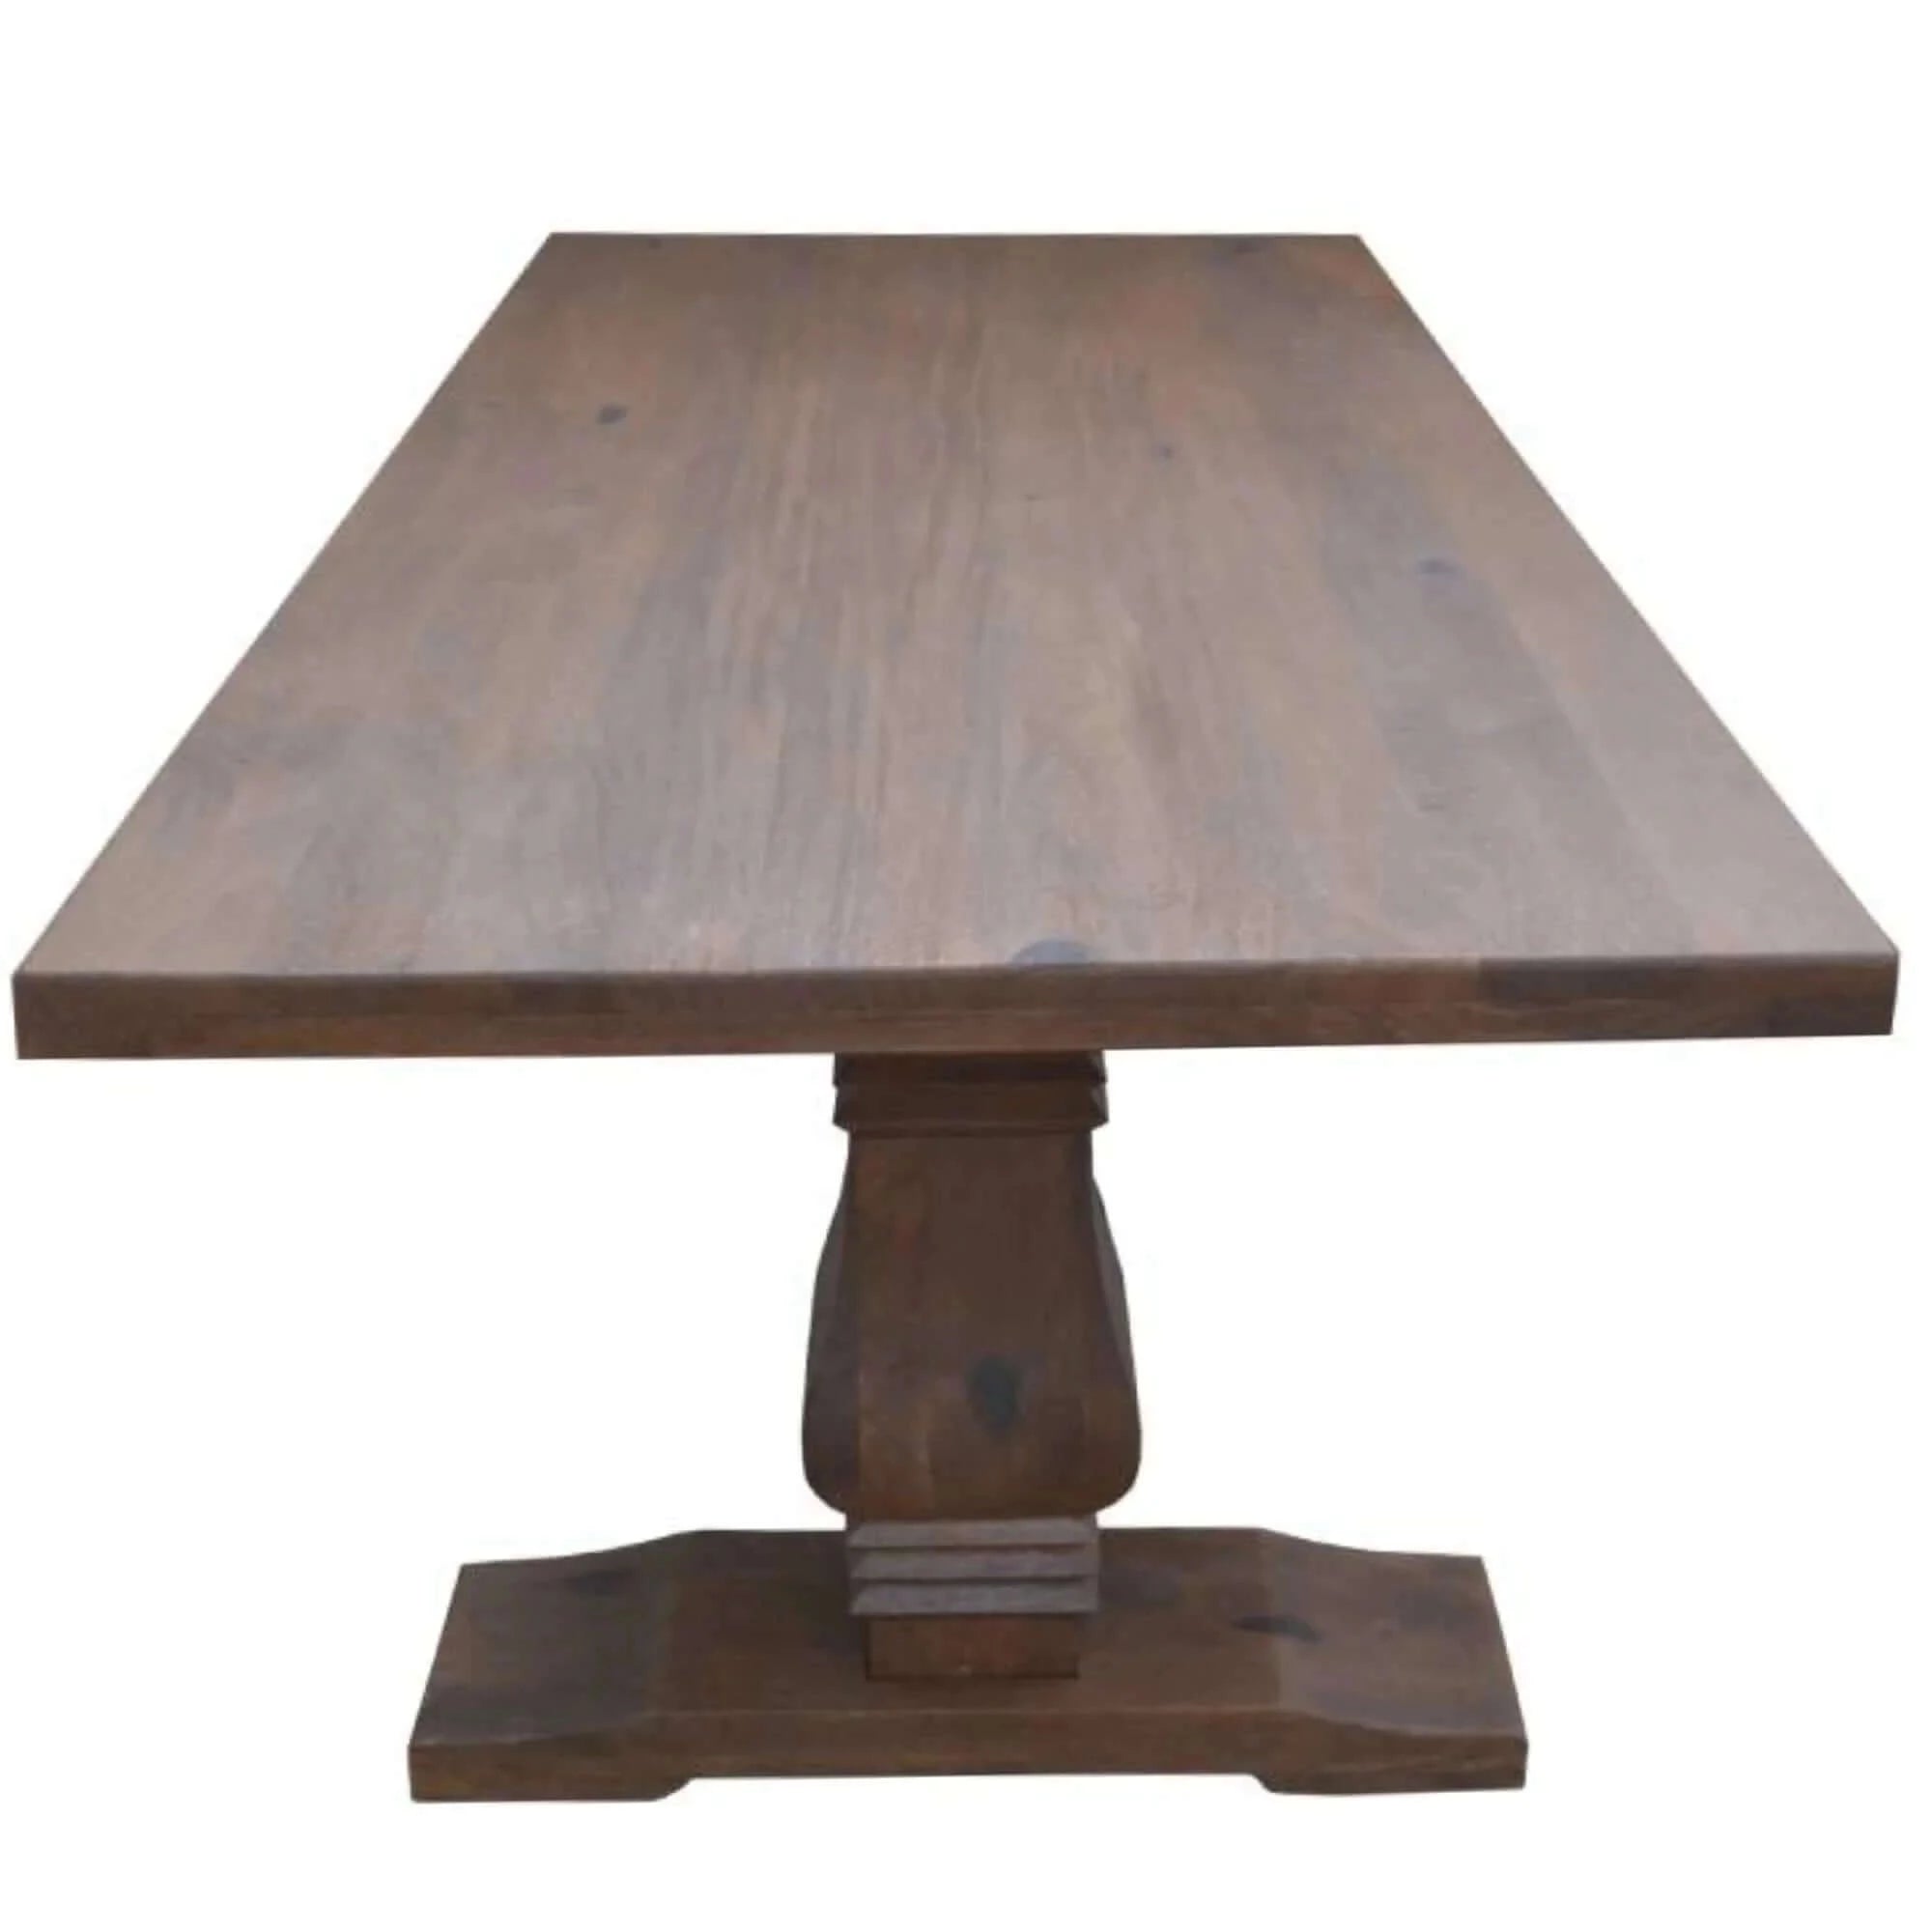 Buy florence dining table 180cm french provincial pedestal solid timber wood - upinteriors-Upinteriors